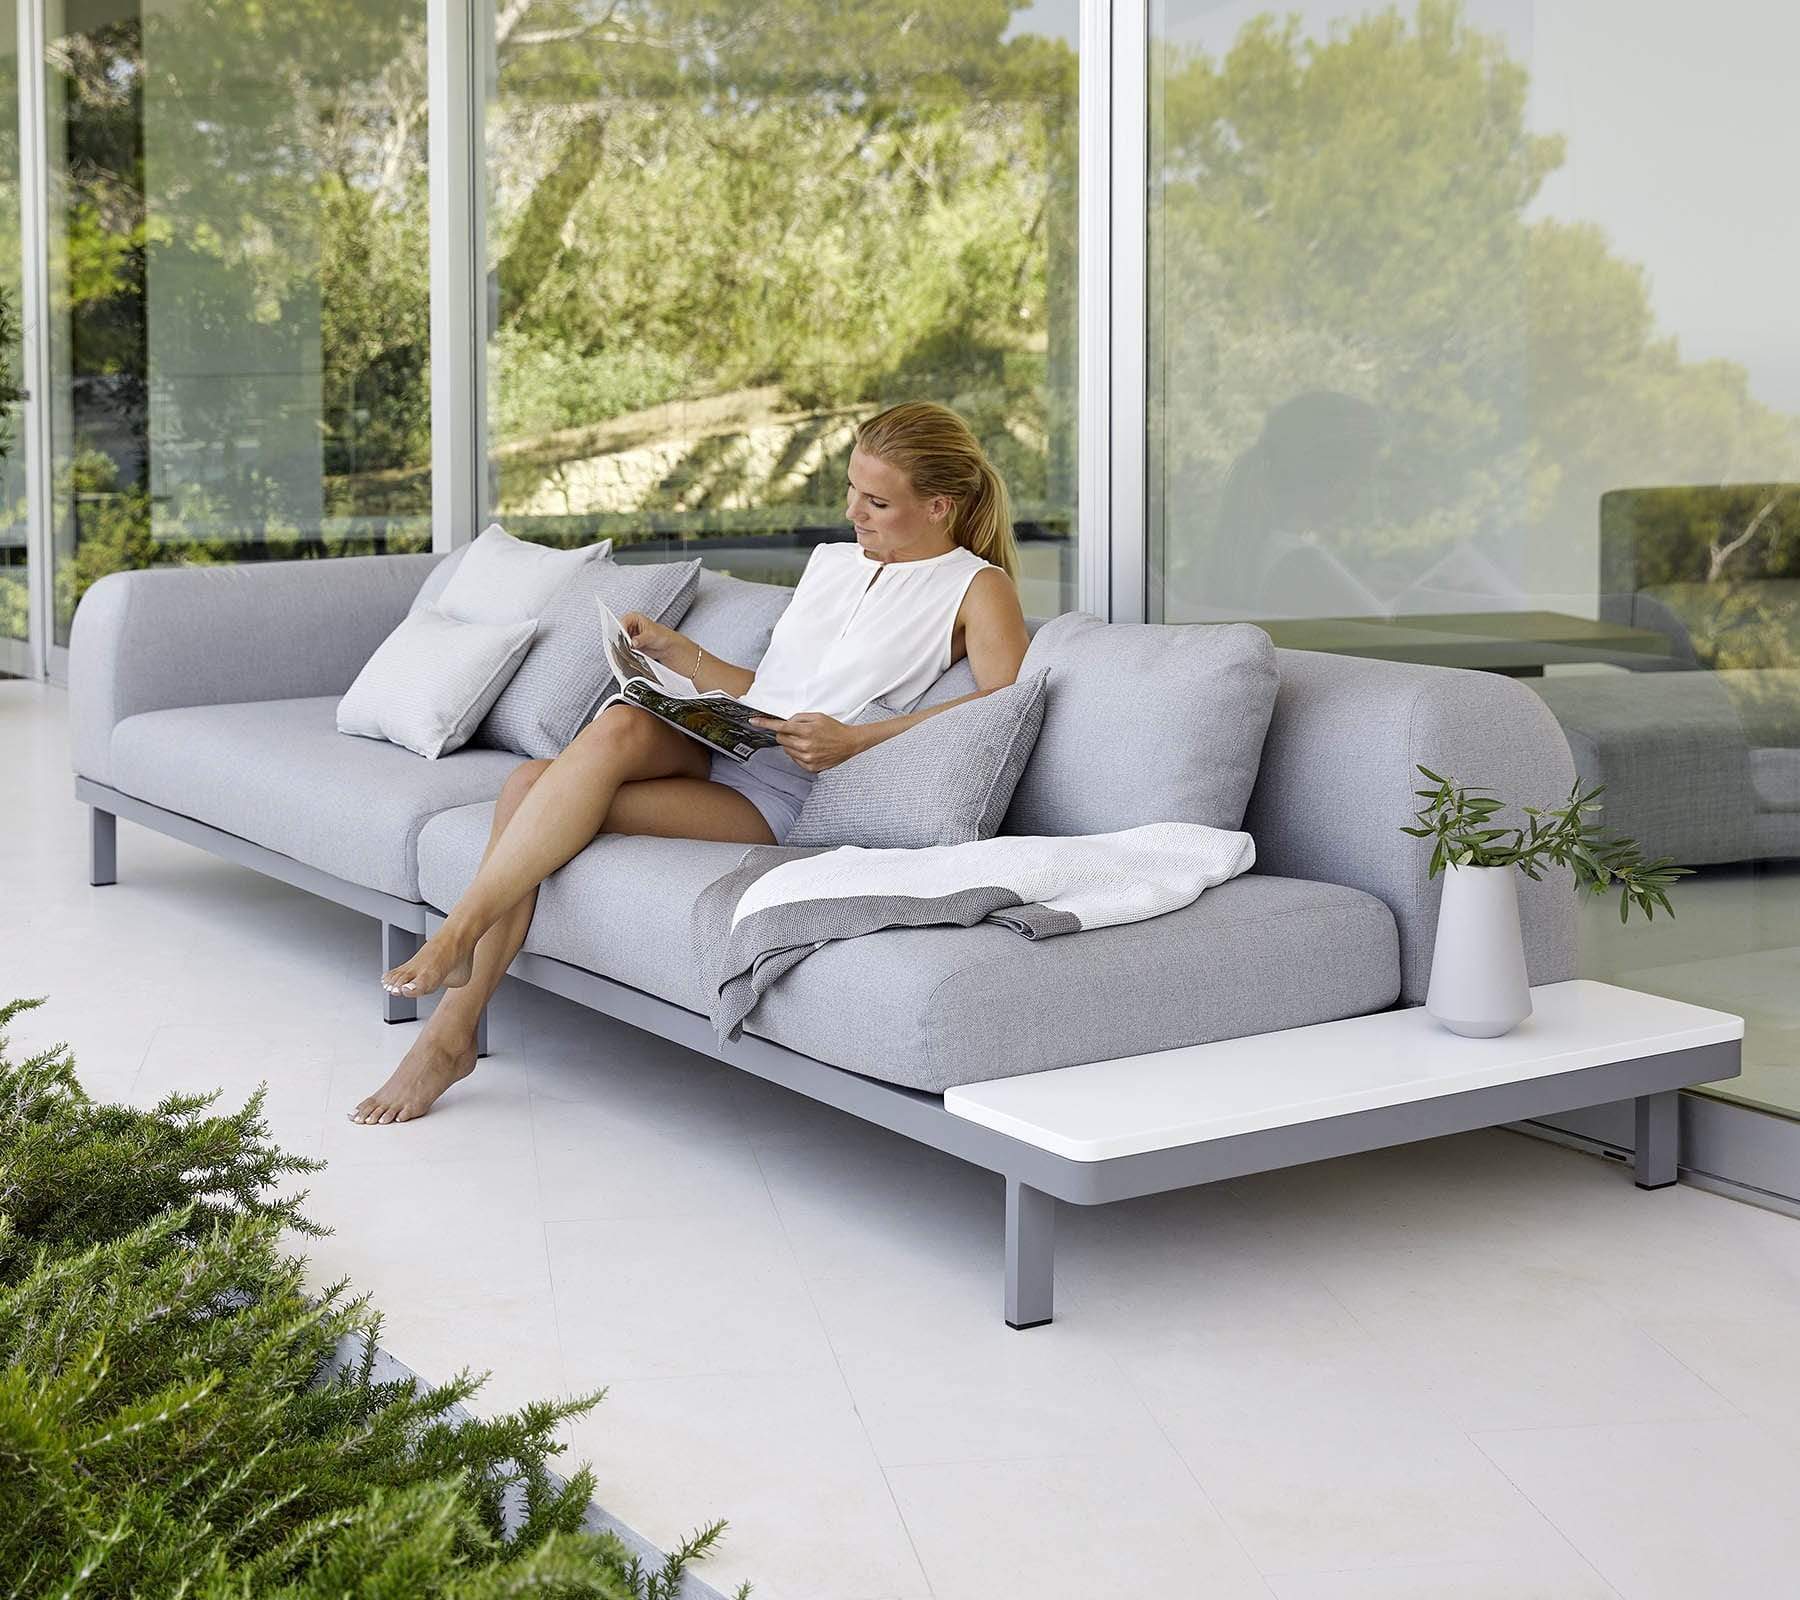 Boxhill's Space light grey outdoor sectional sofa placed against glass wall with a woman sitting on it reading a magazine